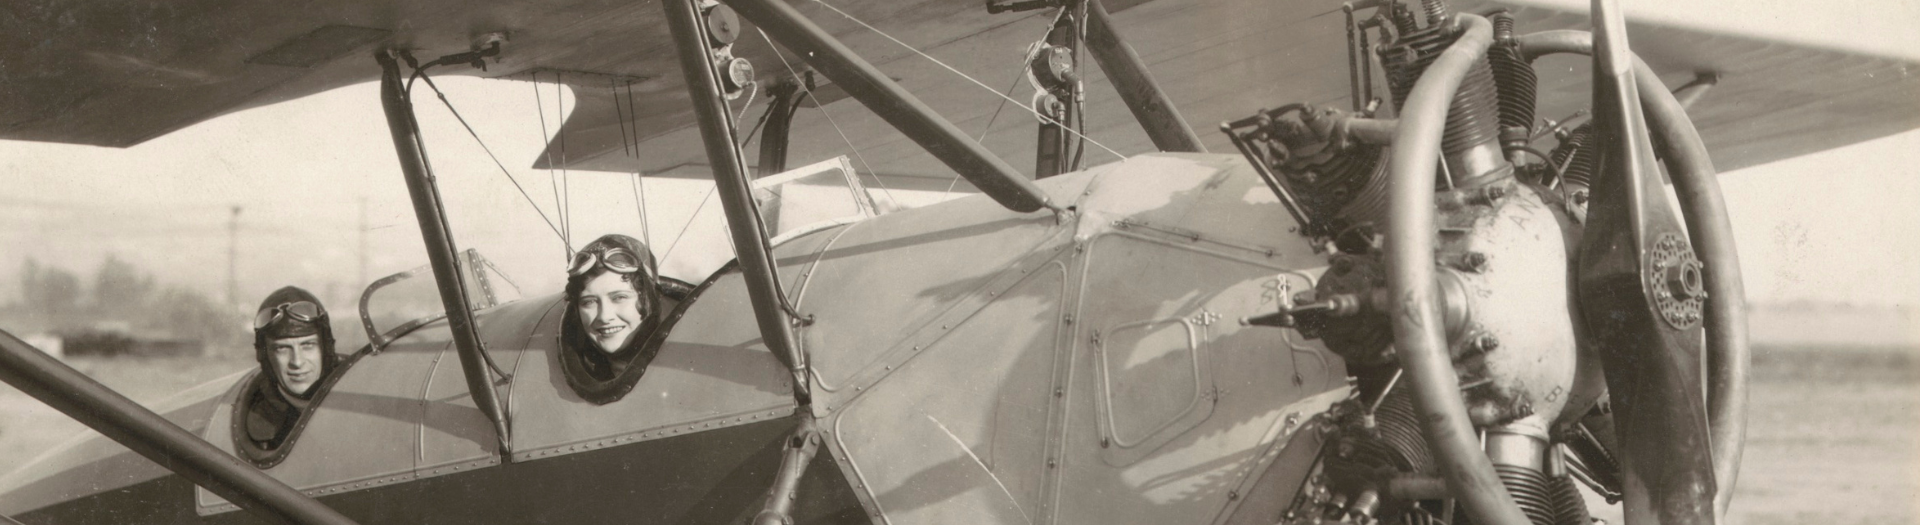 A black and white image of two people sitting in a 1920s style aeroplane while grounded.